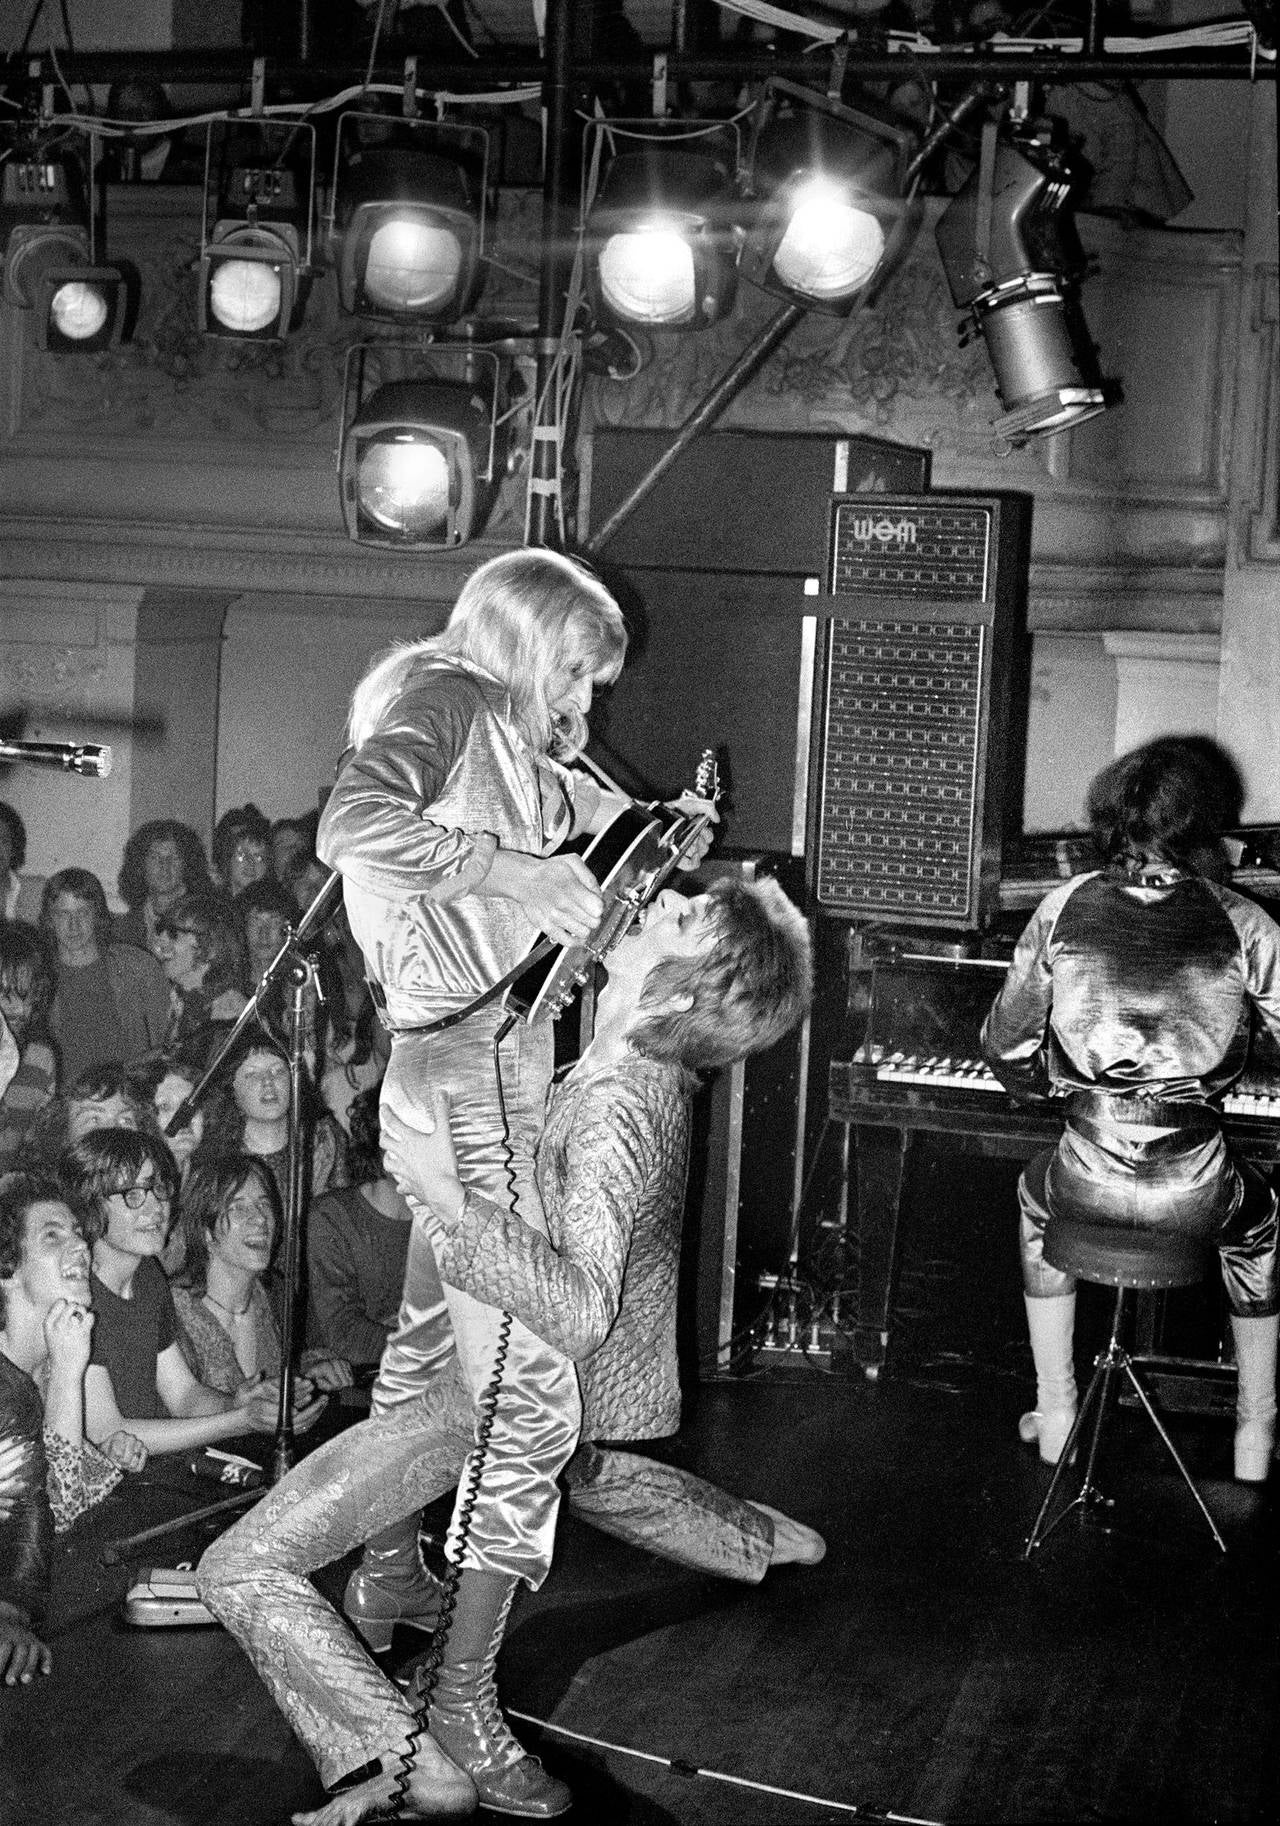 Mick Rock Black and White Photograph - Bowie and Ronson, Guitar Fellatio